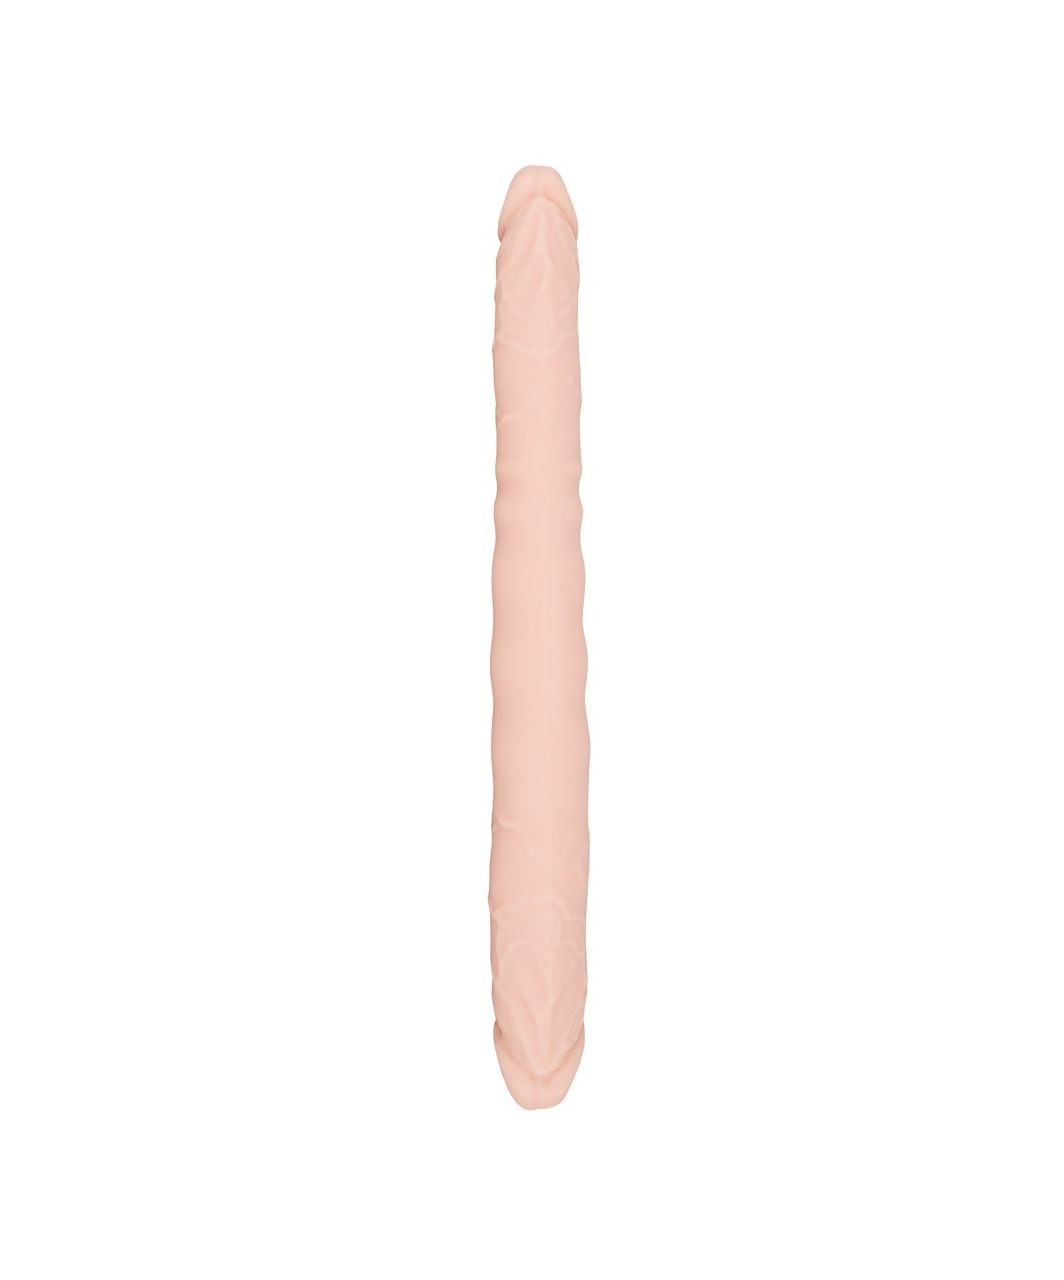 You2Toys Double Dong double ended dildo